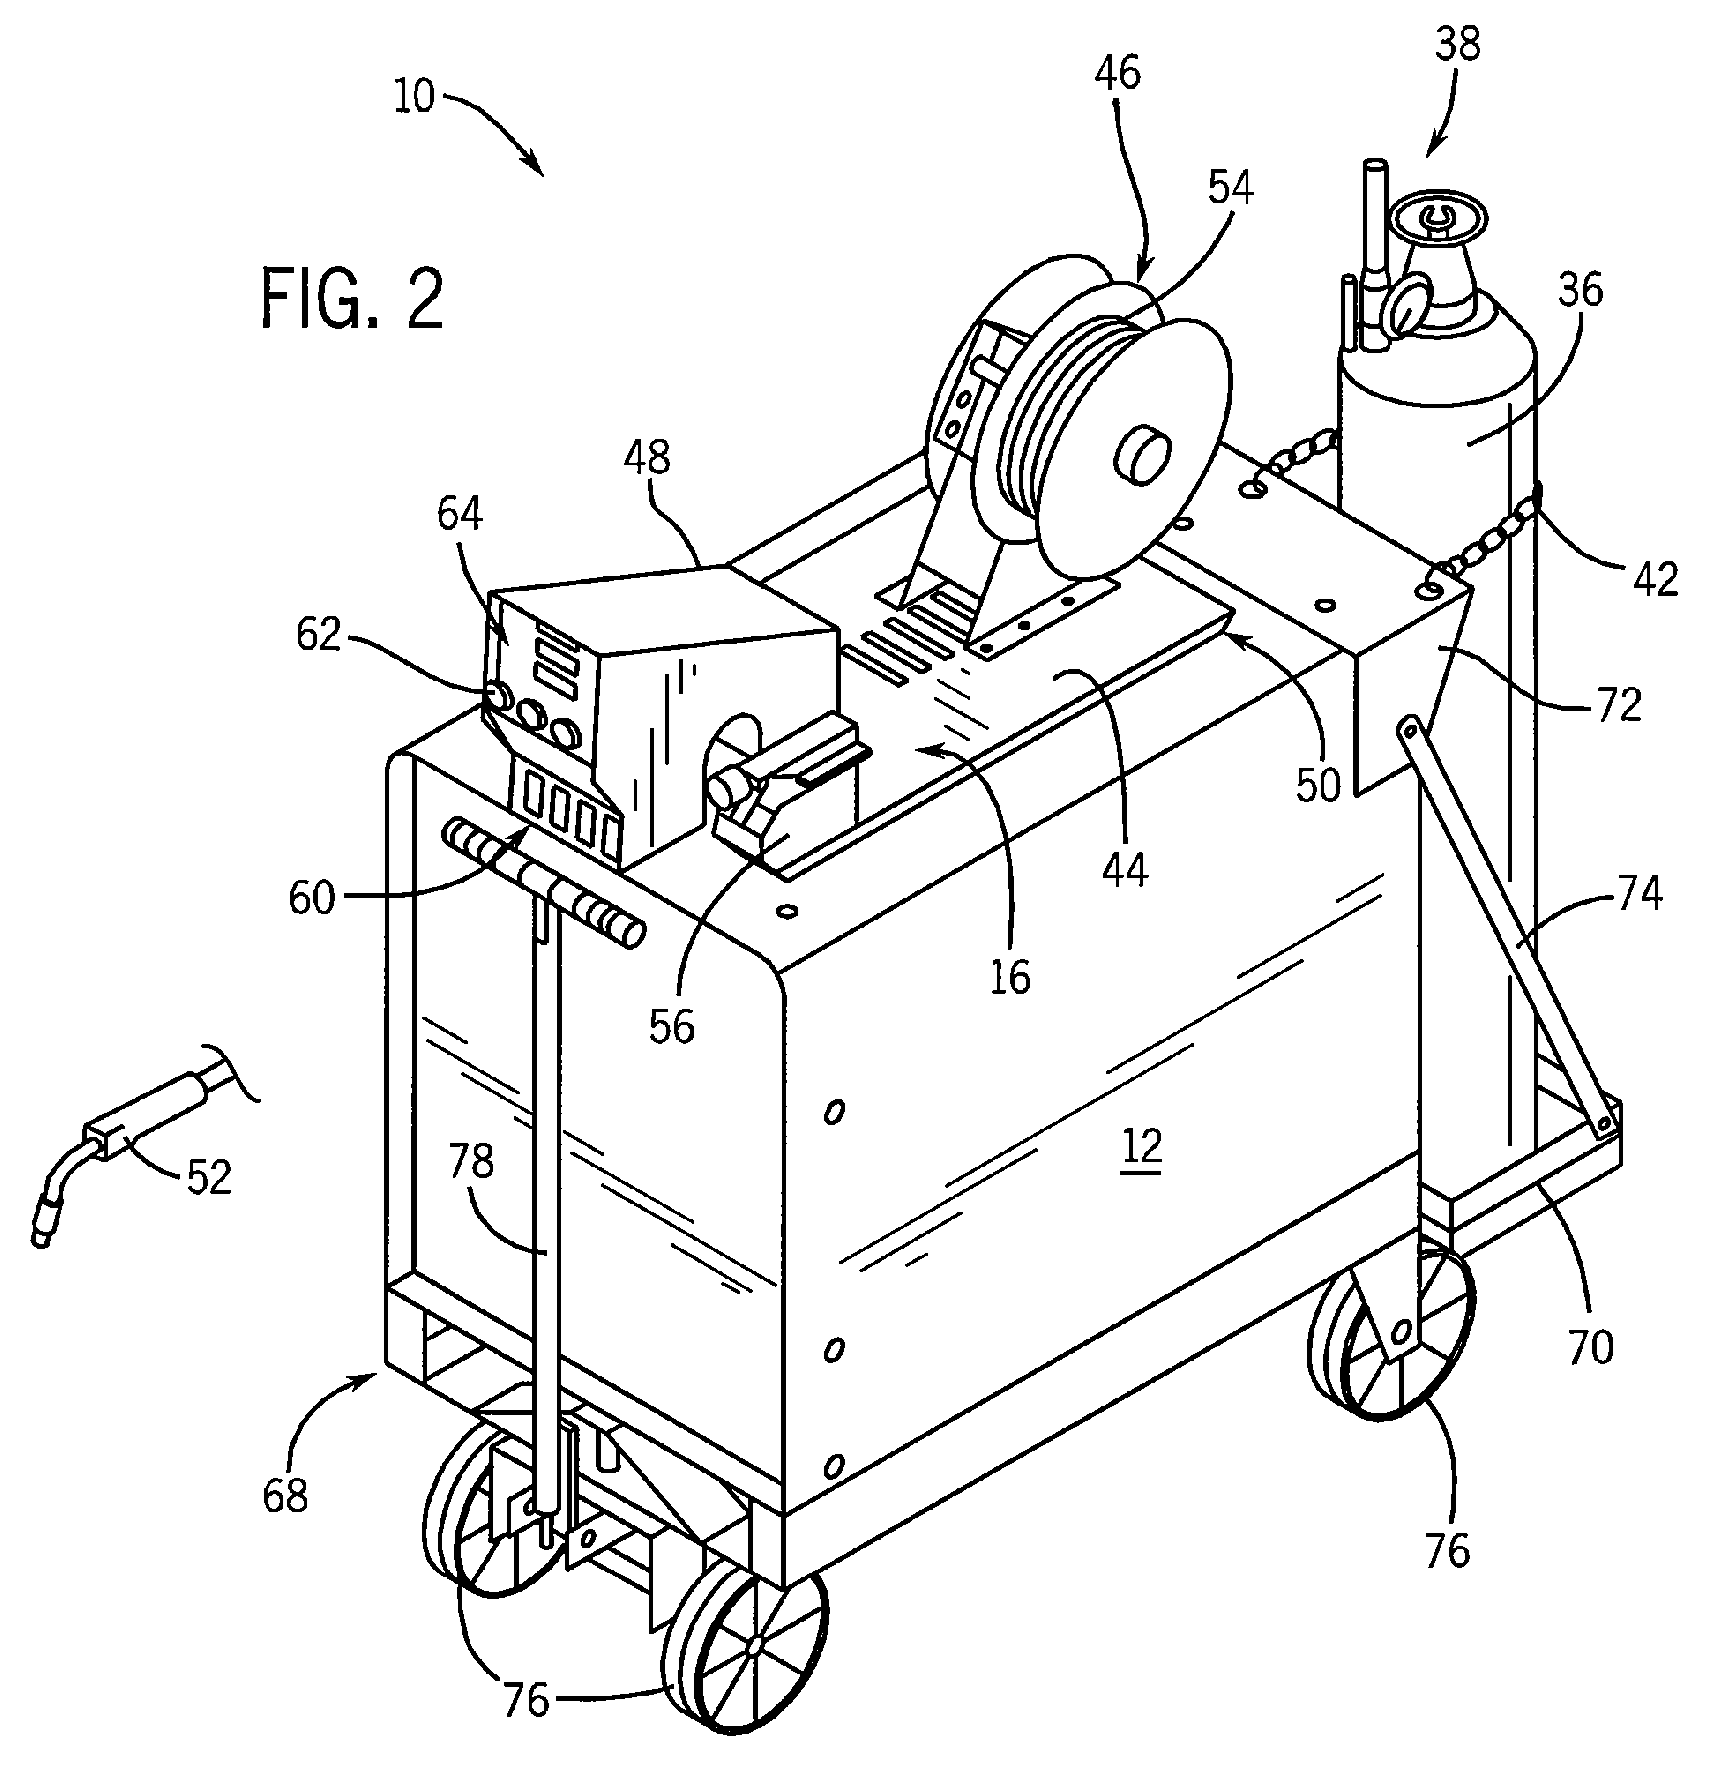 System and method of precise wire feed control in a welder